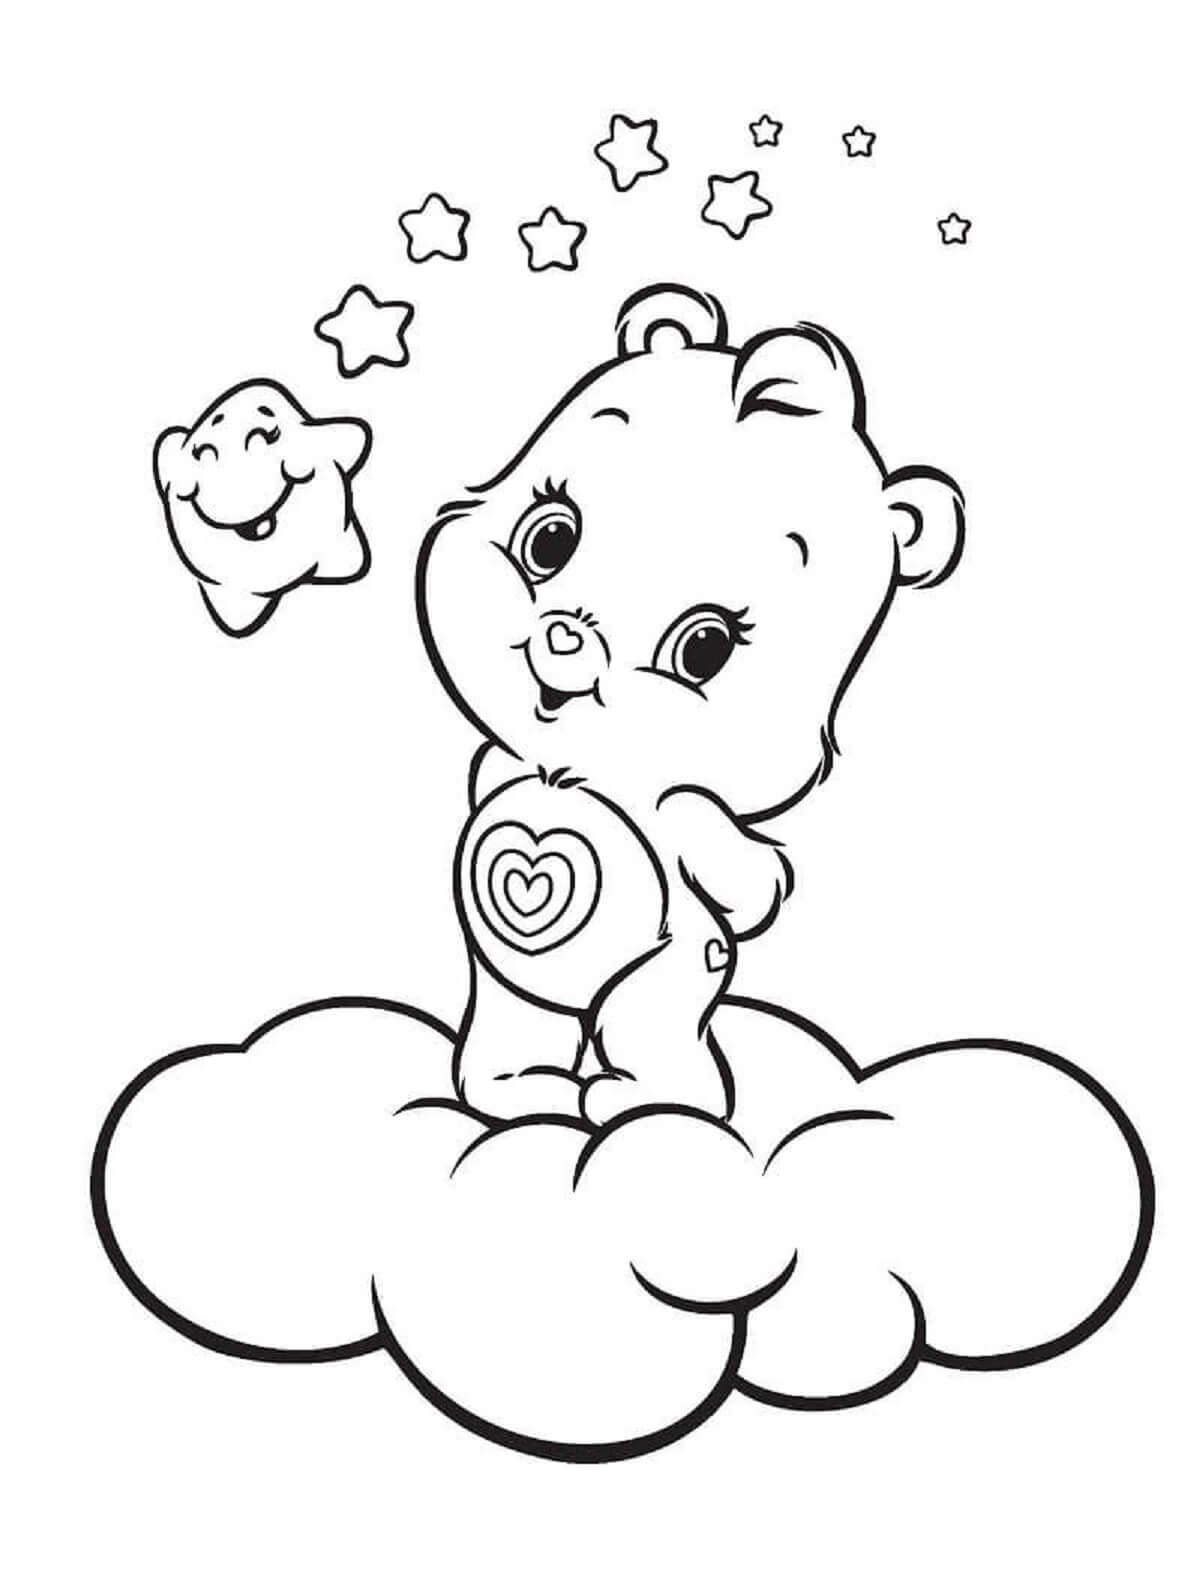 Care Bear on Cloud with Stars